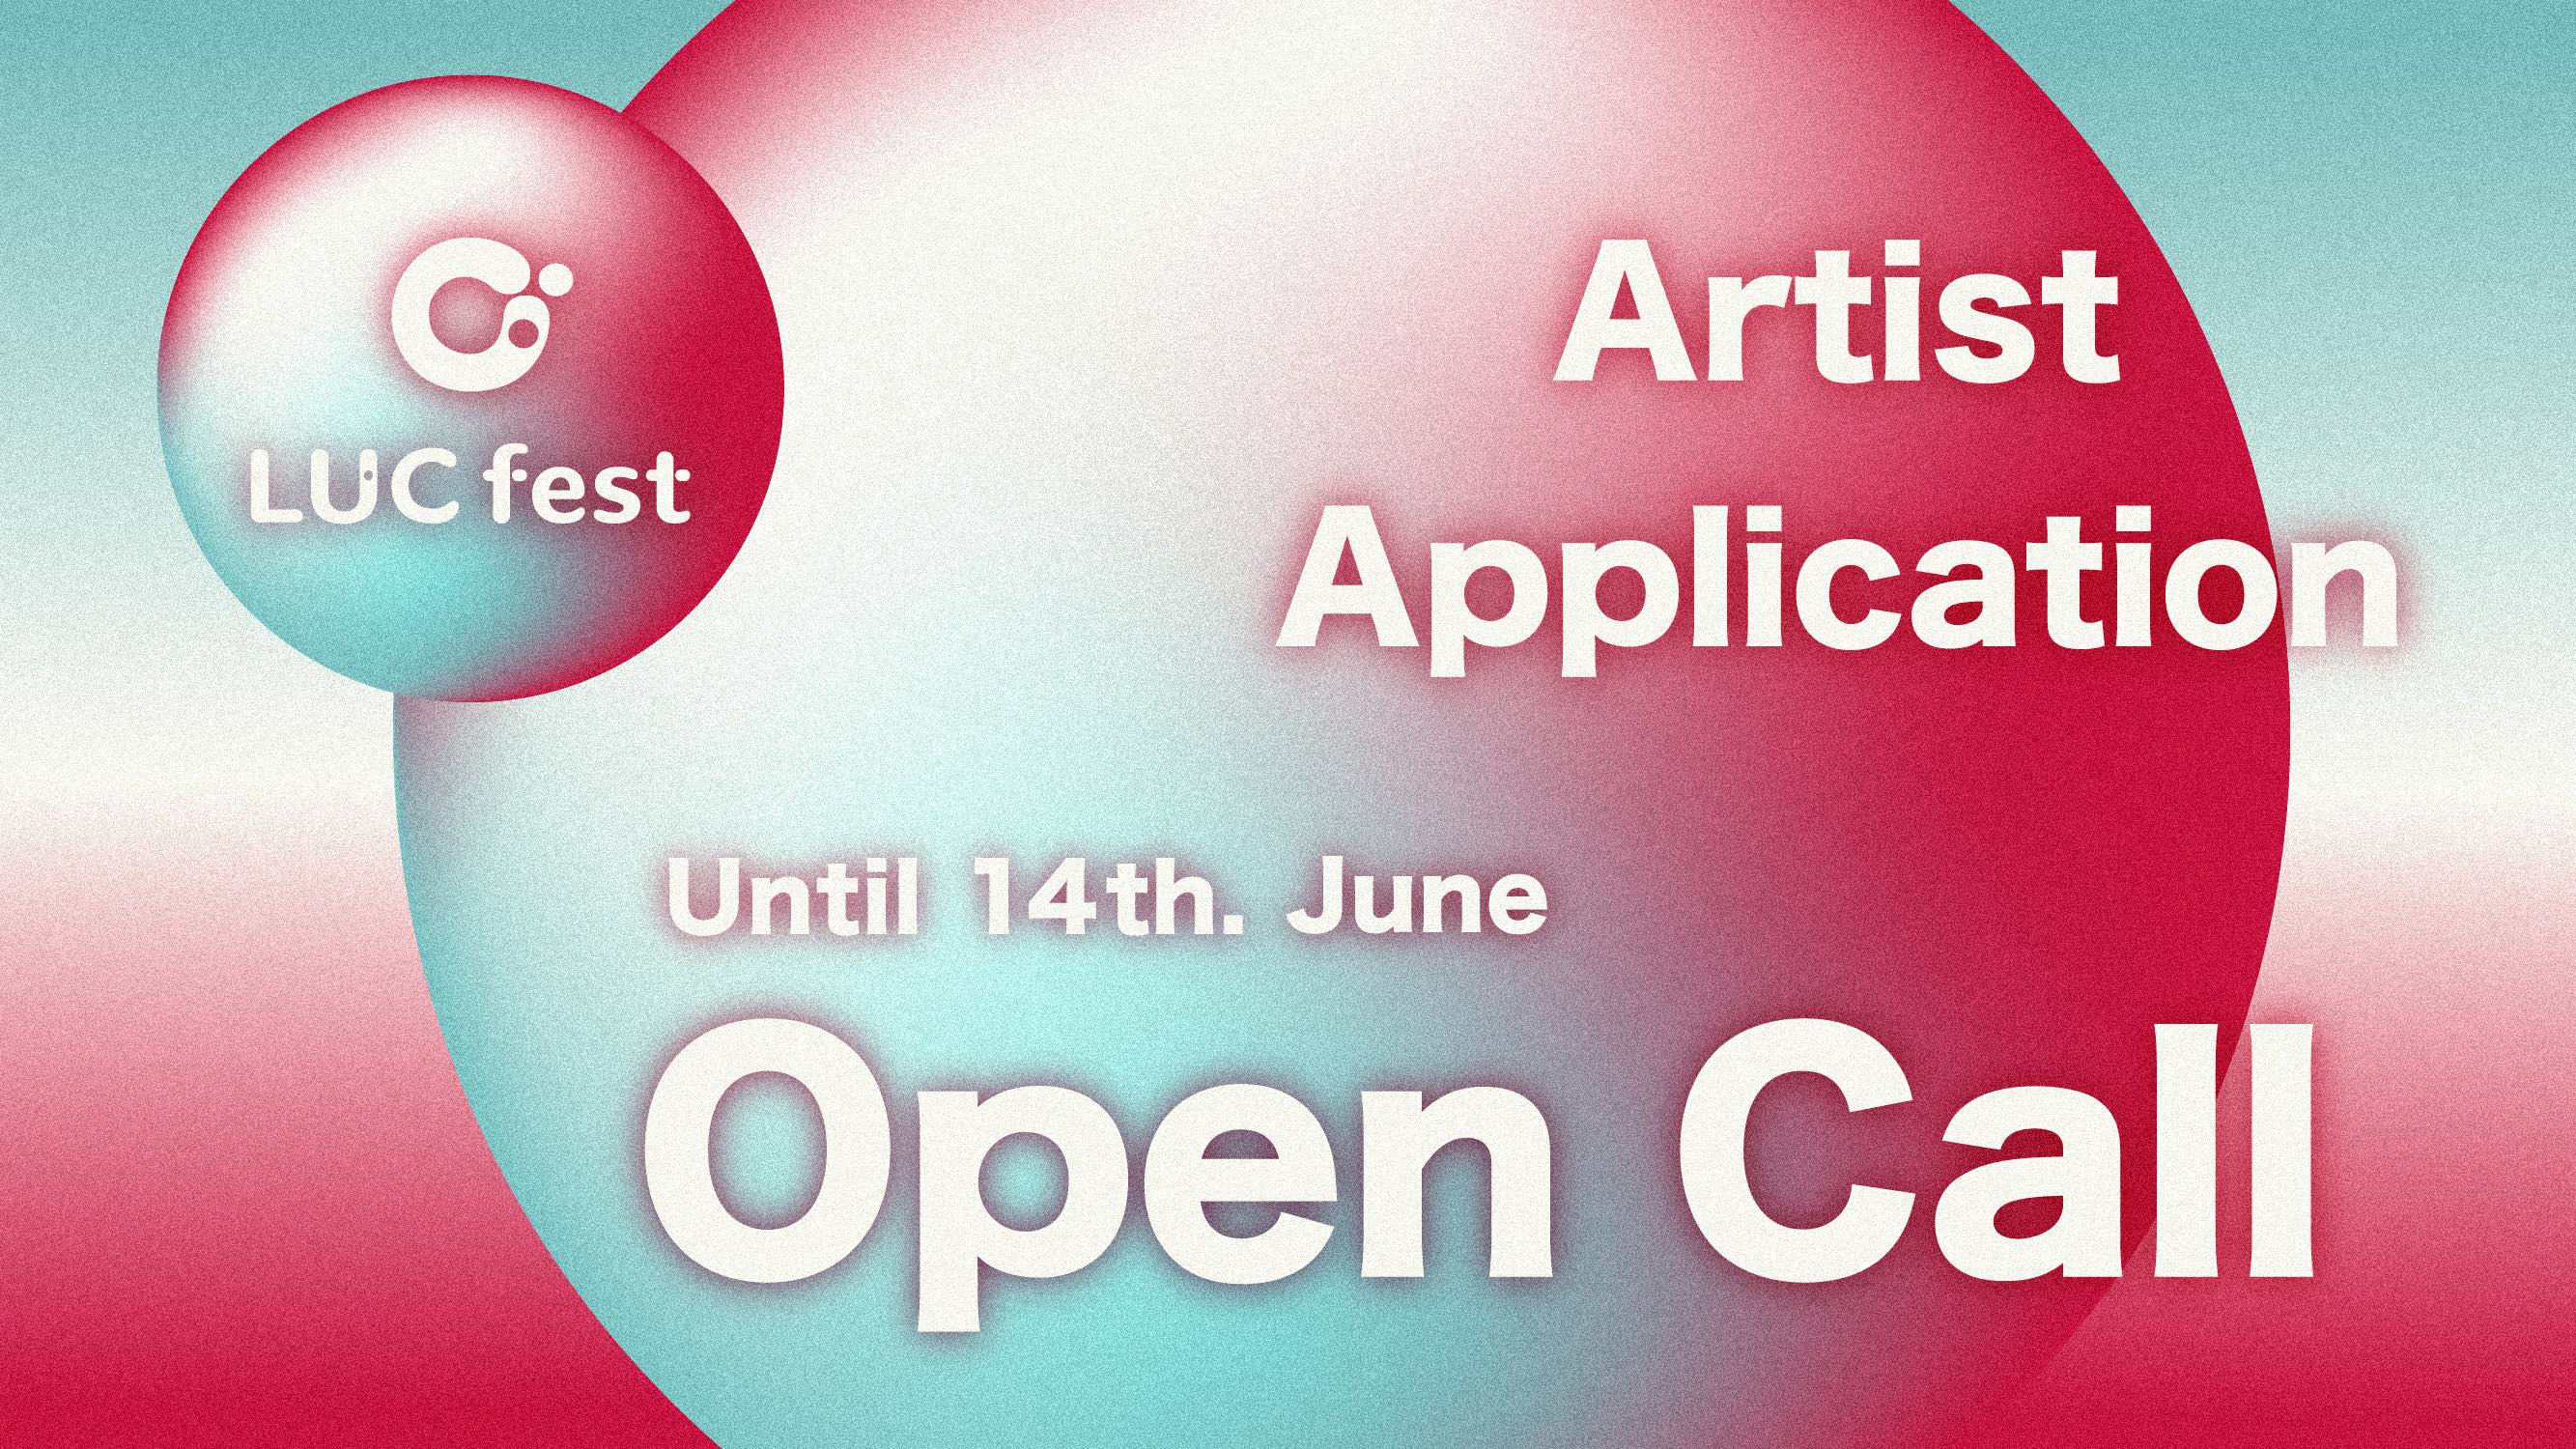 Taiwan’s LUCfest Holds Open Call For Artists For 2023